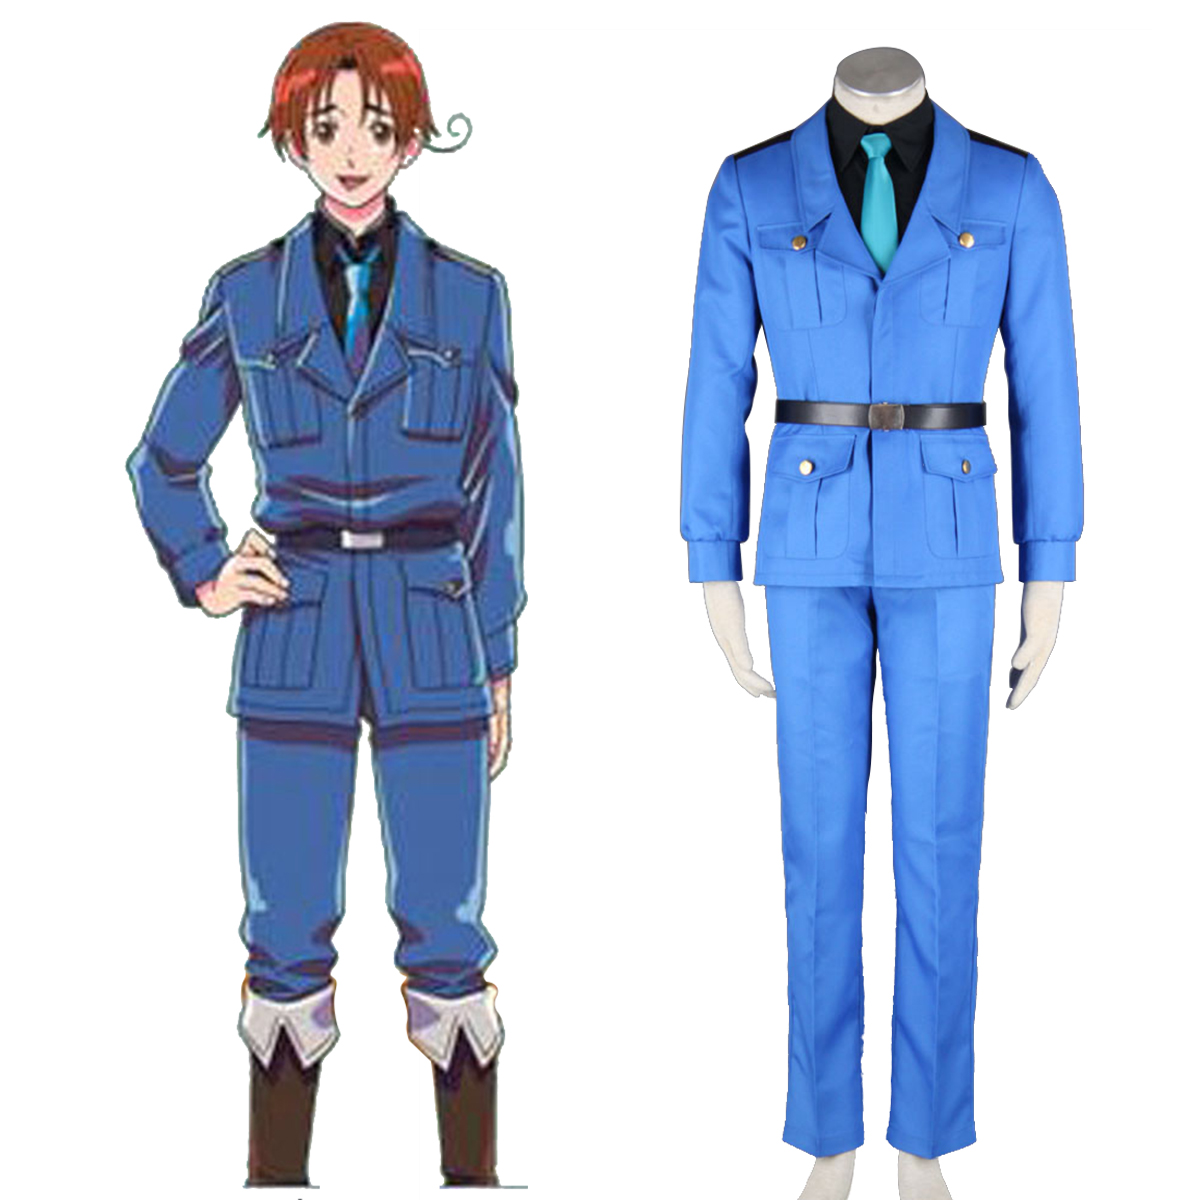 Axis Powers Hetalia APH North Italy Feliciano Vargas 3 Anime Cosplay Costumes Outfit